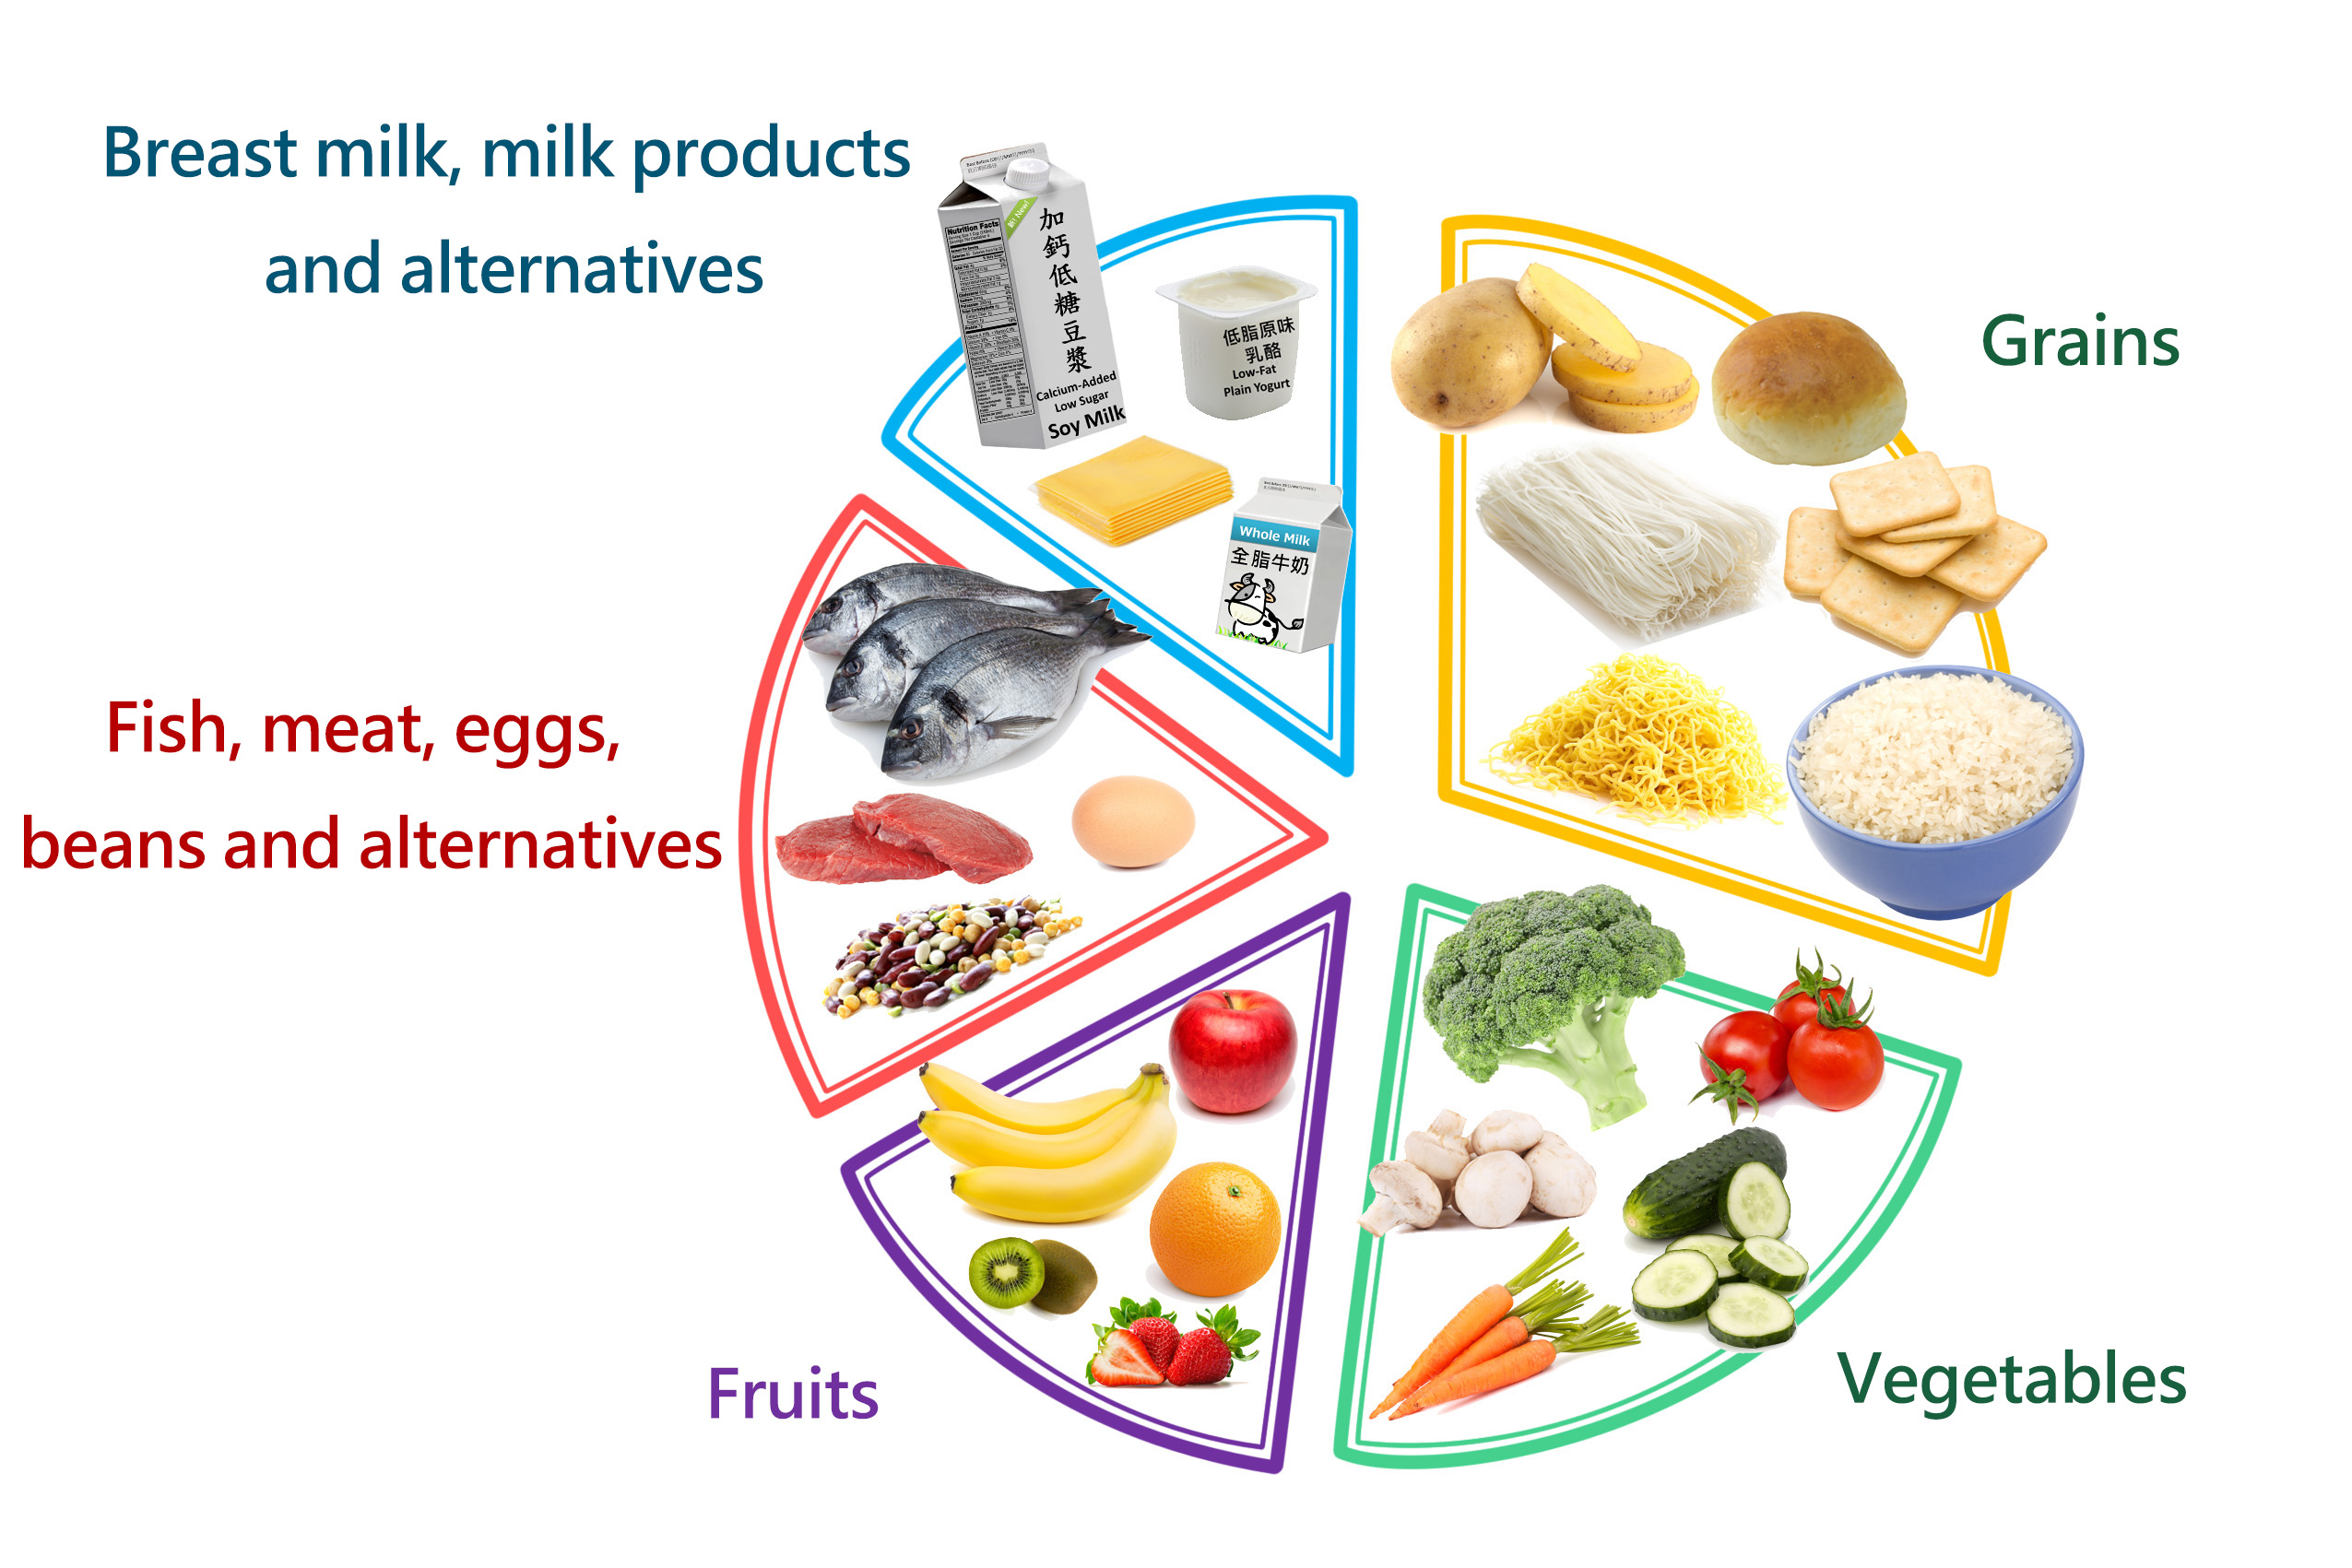 Balanced diet includes grains,vegetables,fruits,fish, meat, eggs, beans and alternatives and breast milk, milk products and alternatives